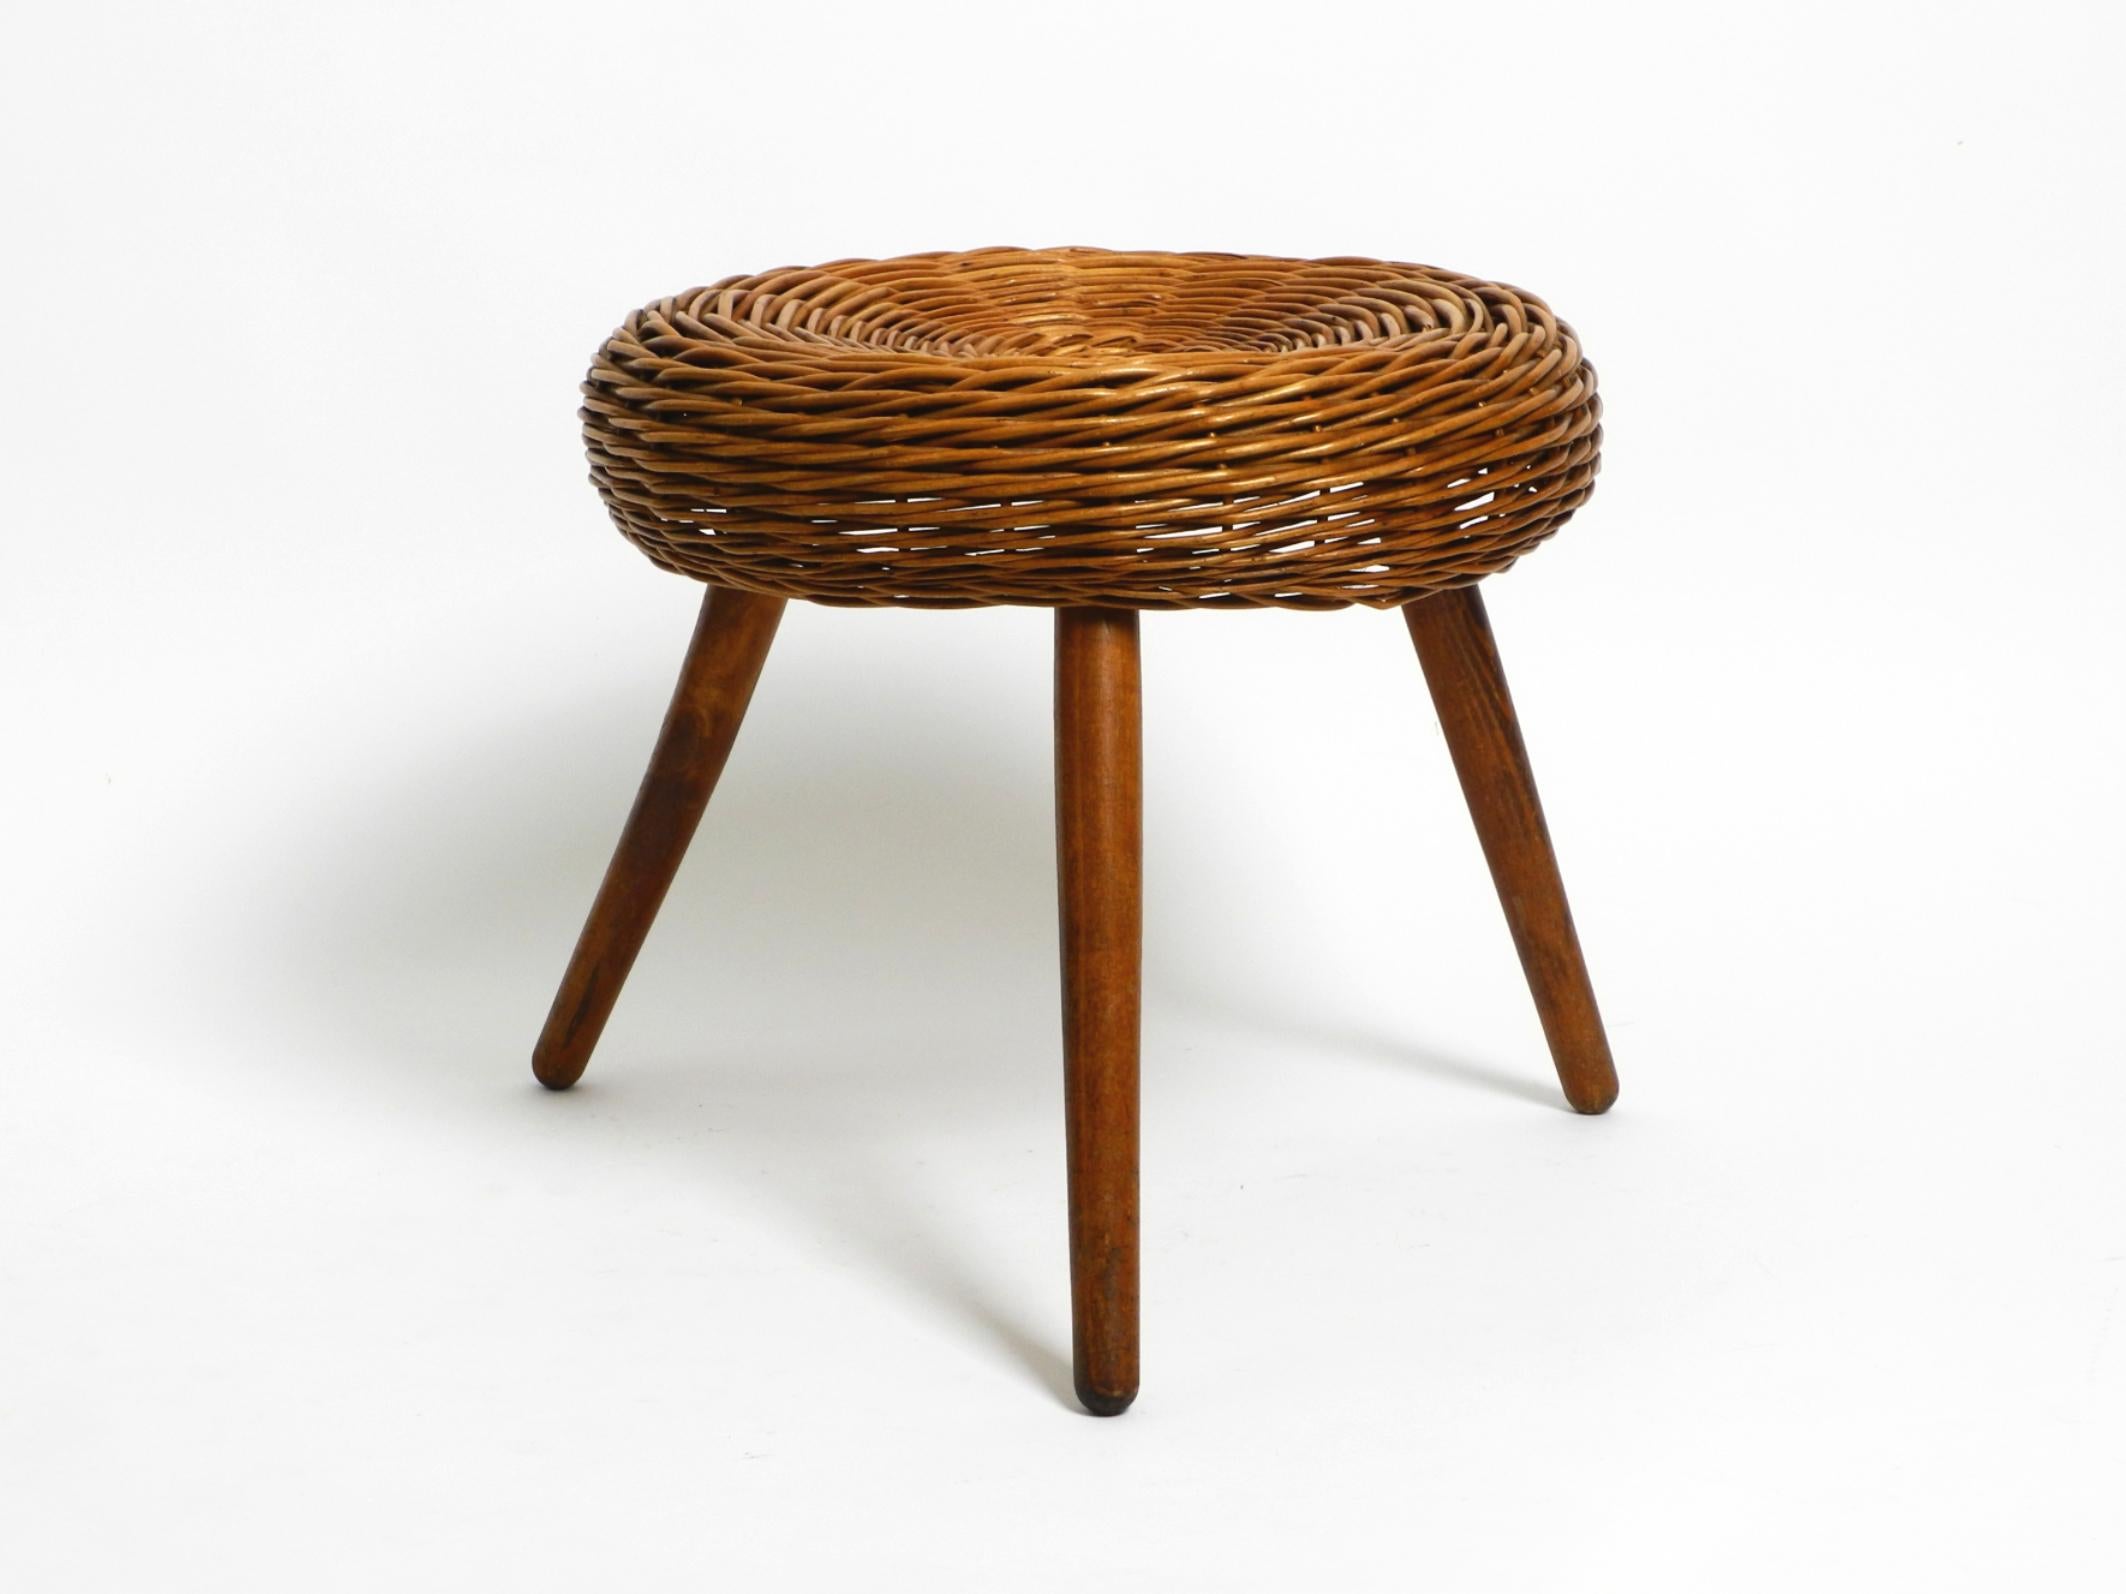 Original large Mid Century Modern rattan stool with wooden legs.
Designed by Tony Paul. Tony Paul was a world-renowned American industrial designer.
He designed furniture, lamps, tableware and much more. His work can be found from the 50s and